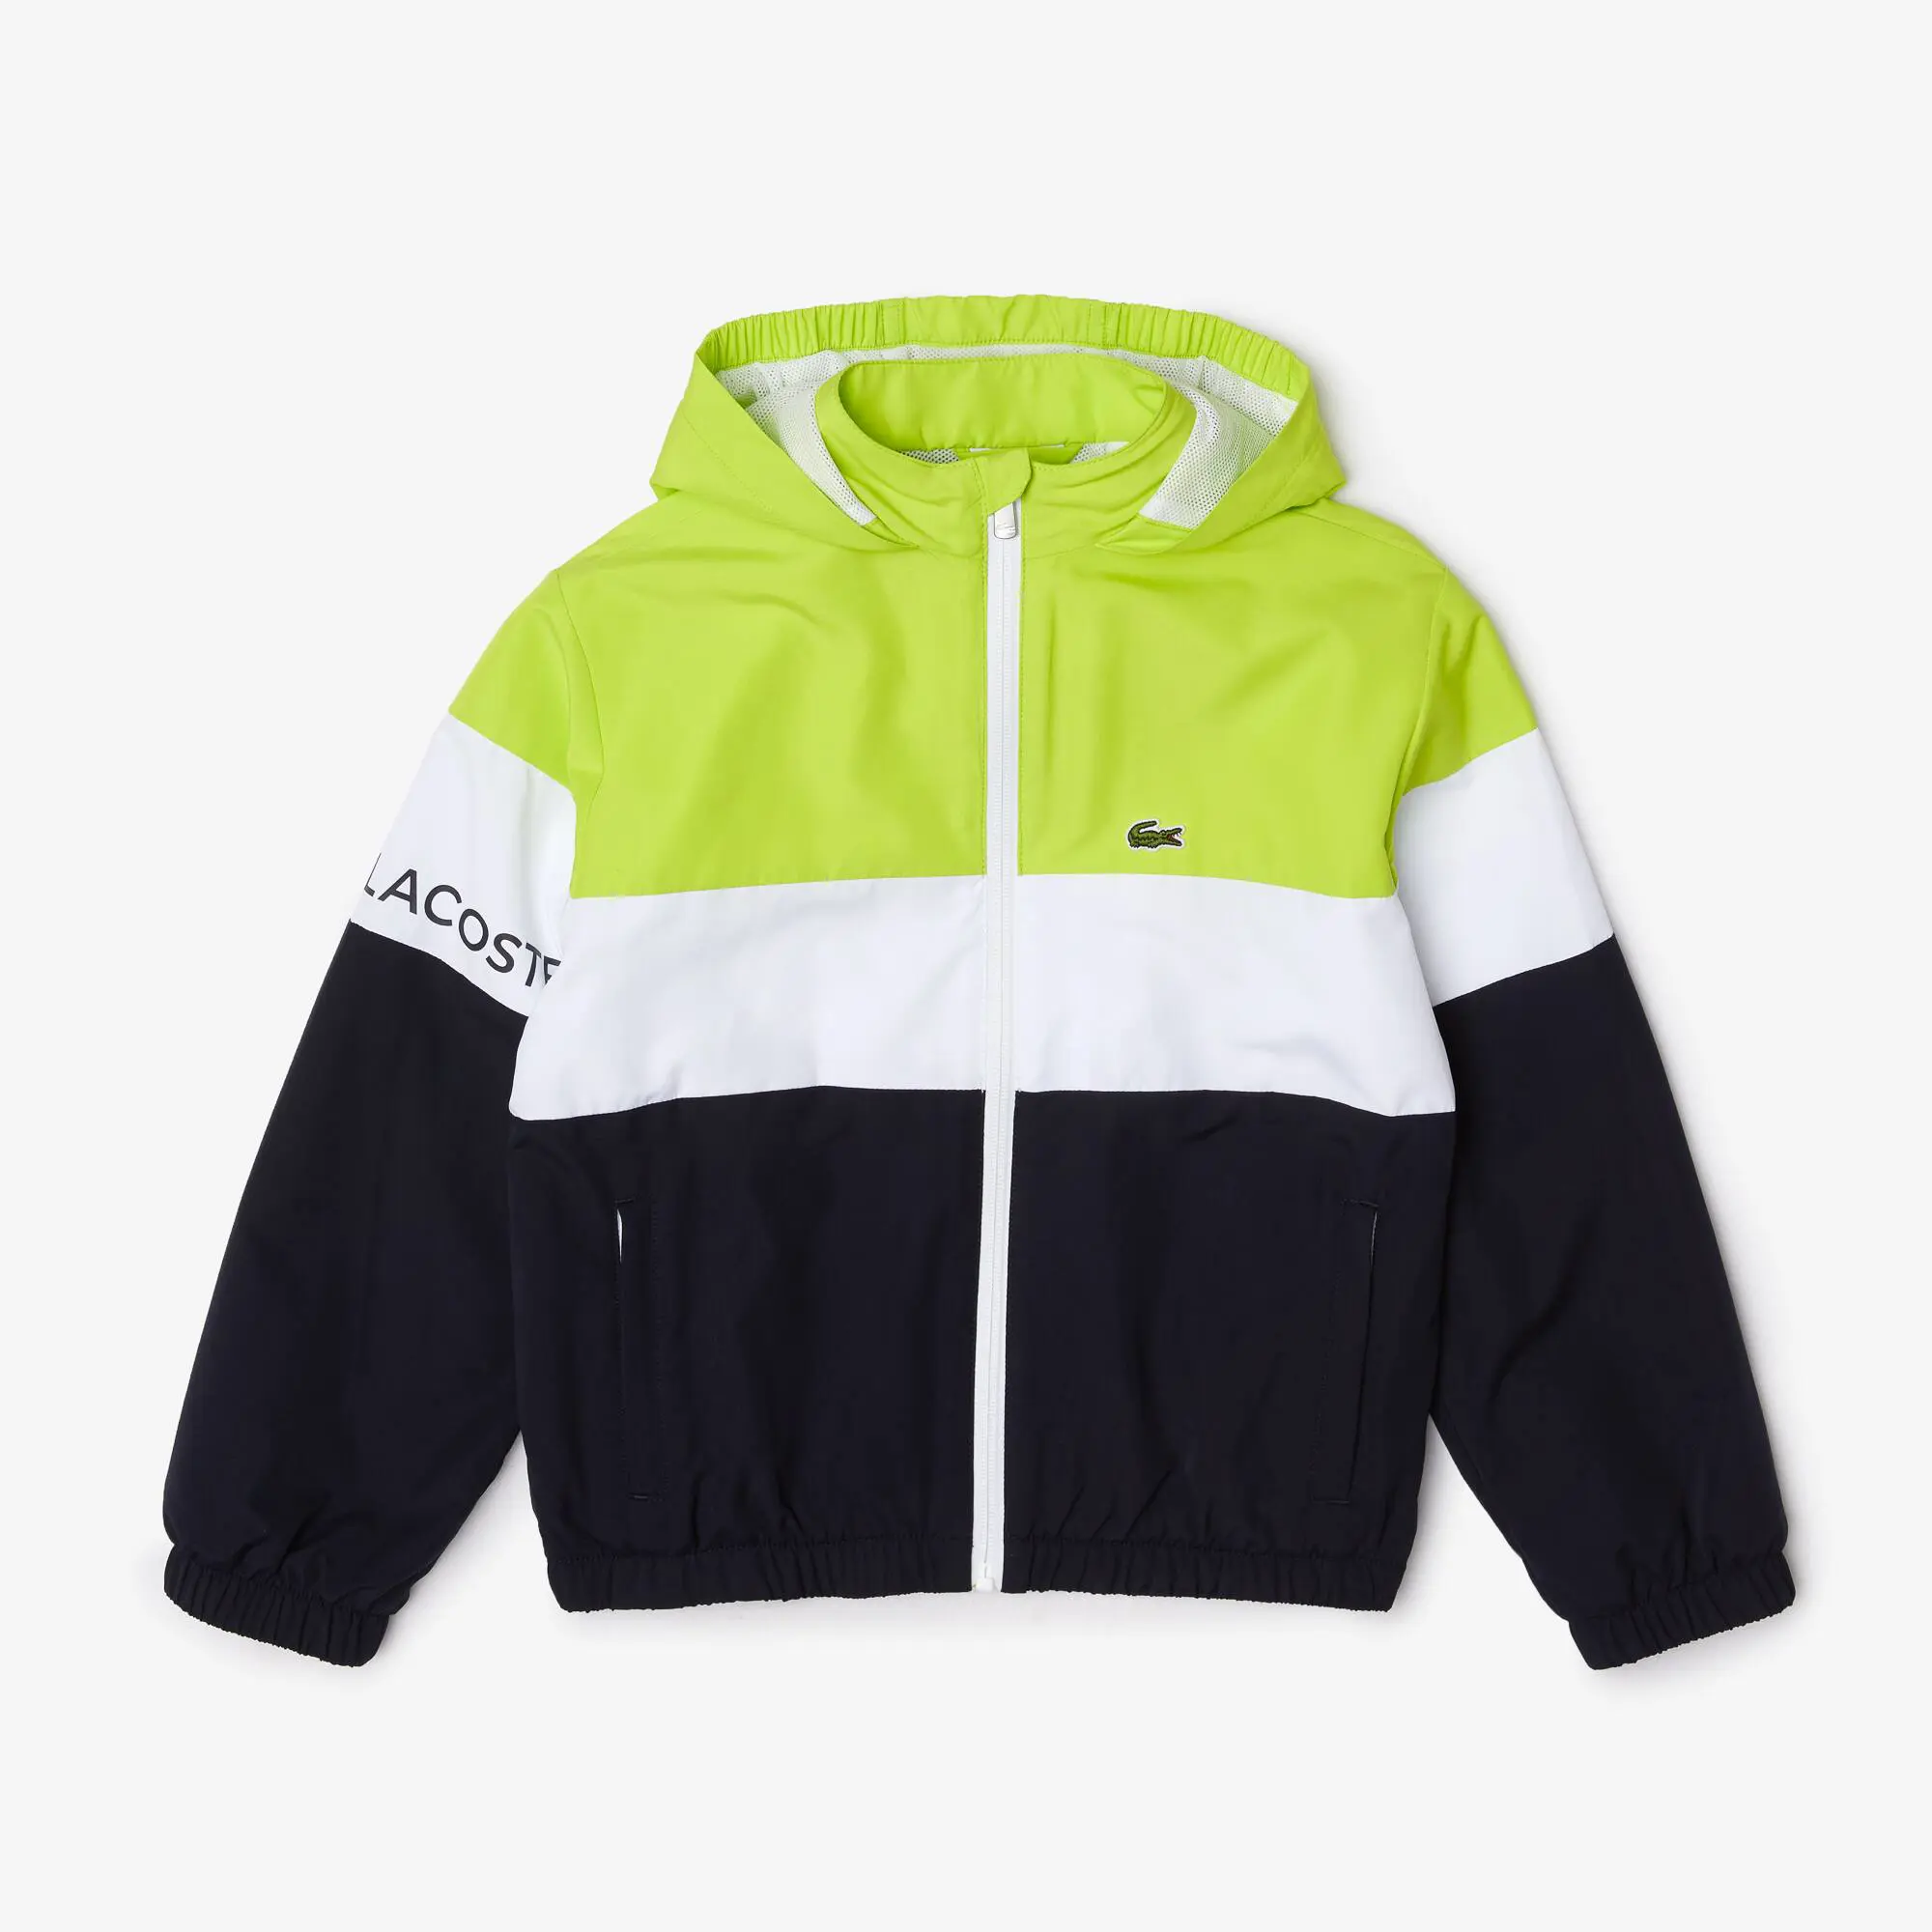 Lacoste Kids’ Lacoste Recycled Polyester Zipped Hooded Jacket. 2